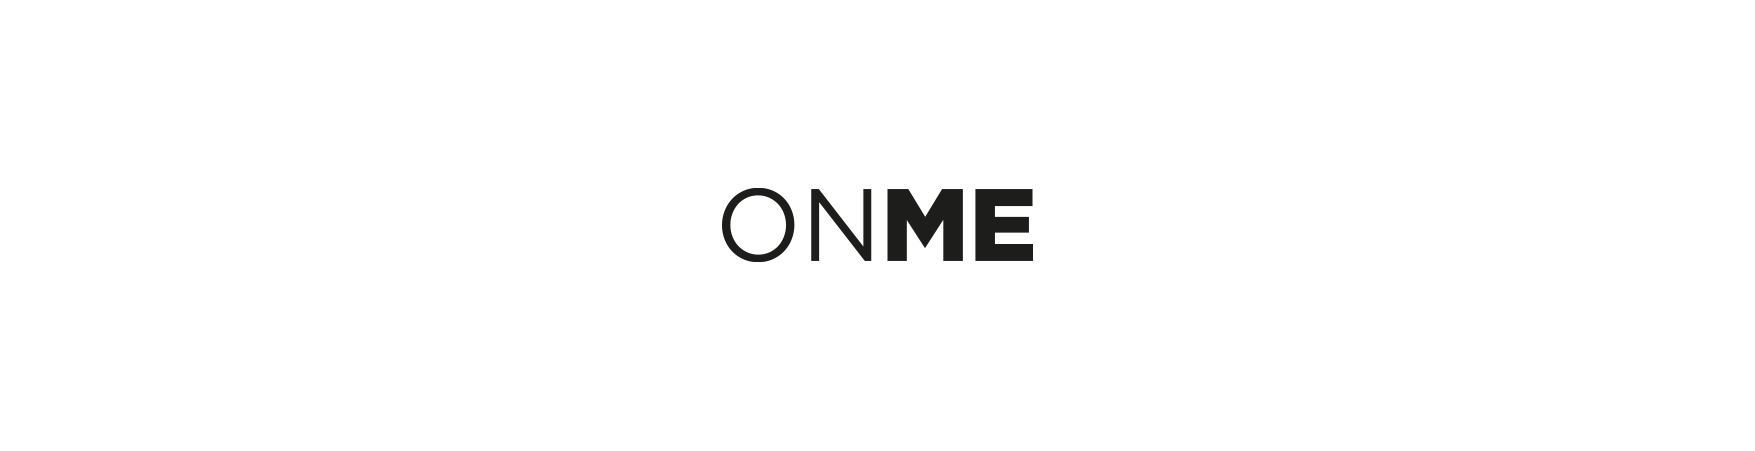 ONME